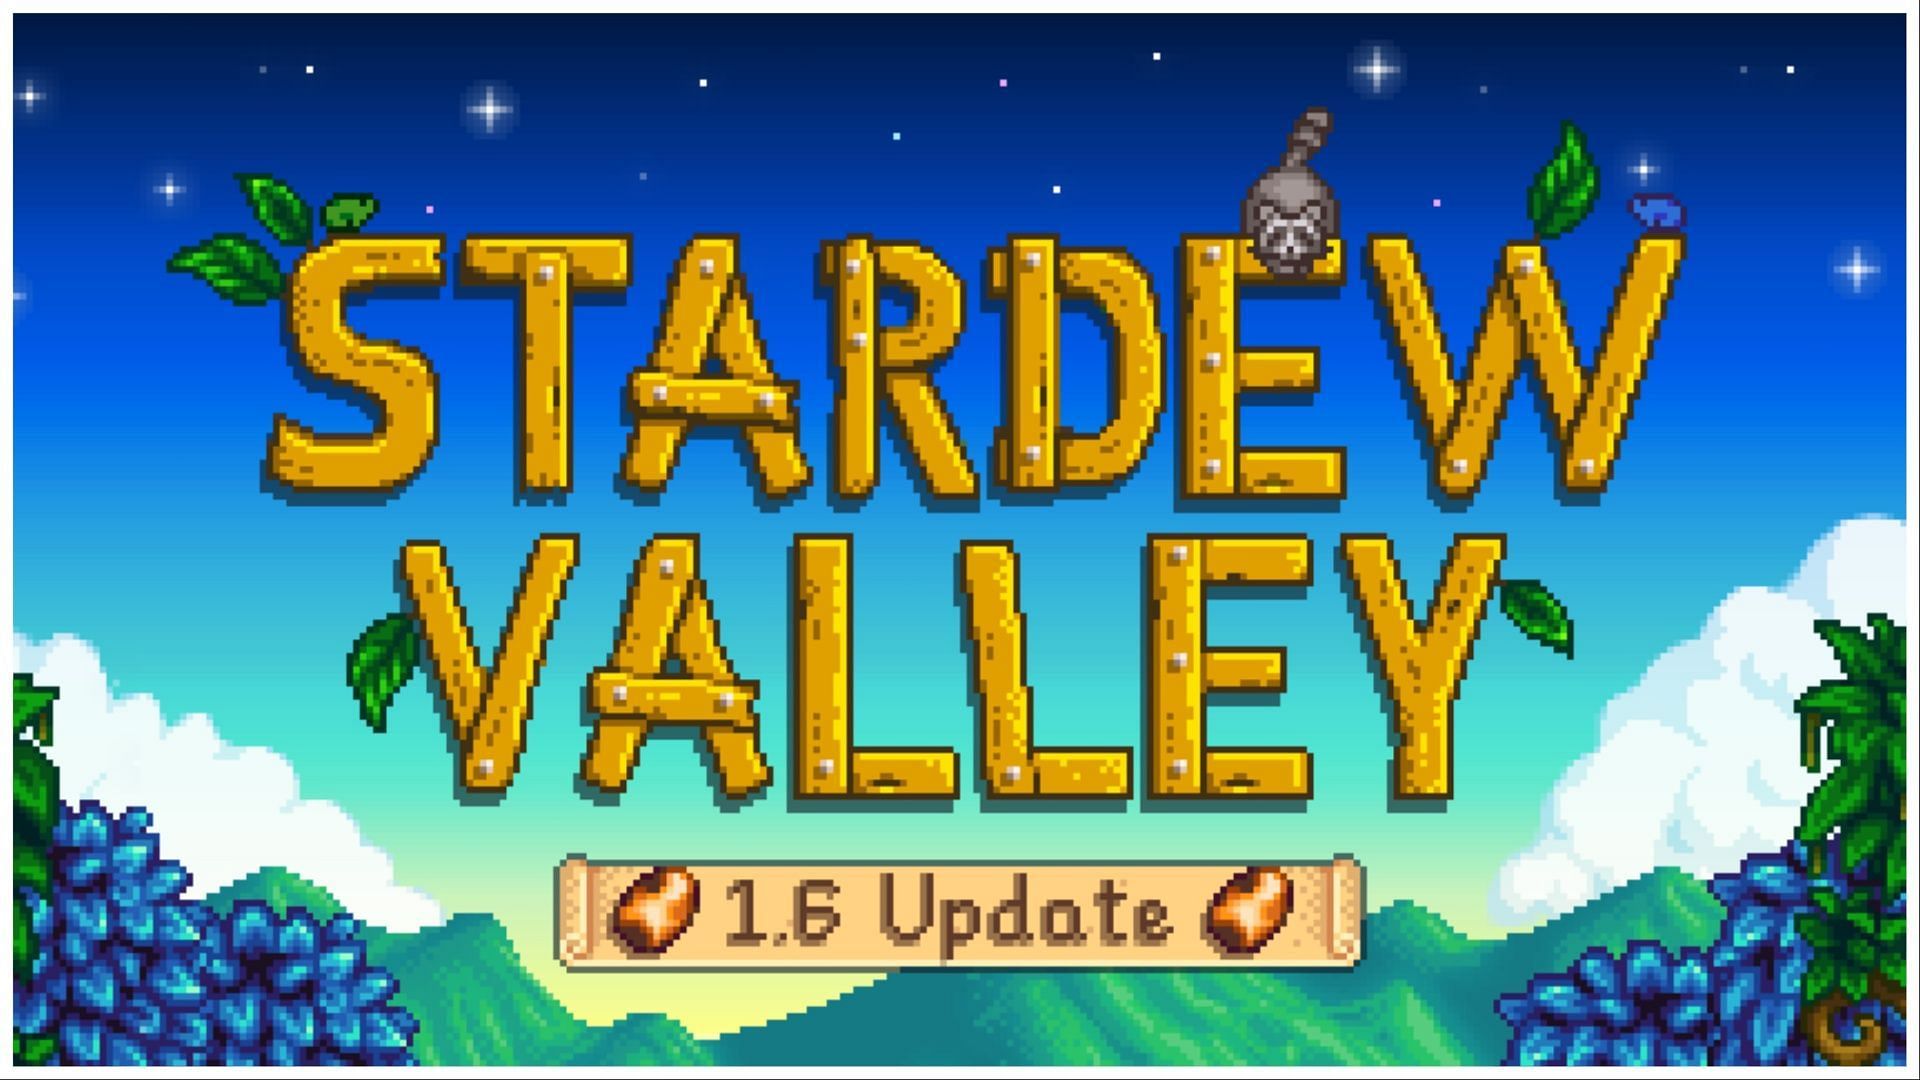 Stardew Valley 1.6 Update brings in a plethora of new features.